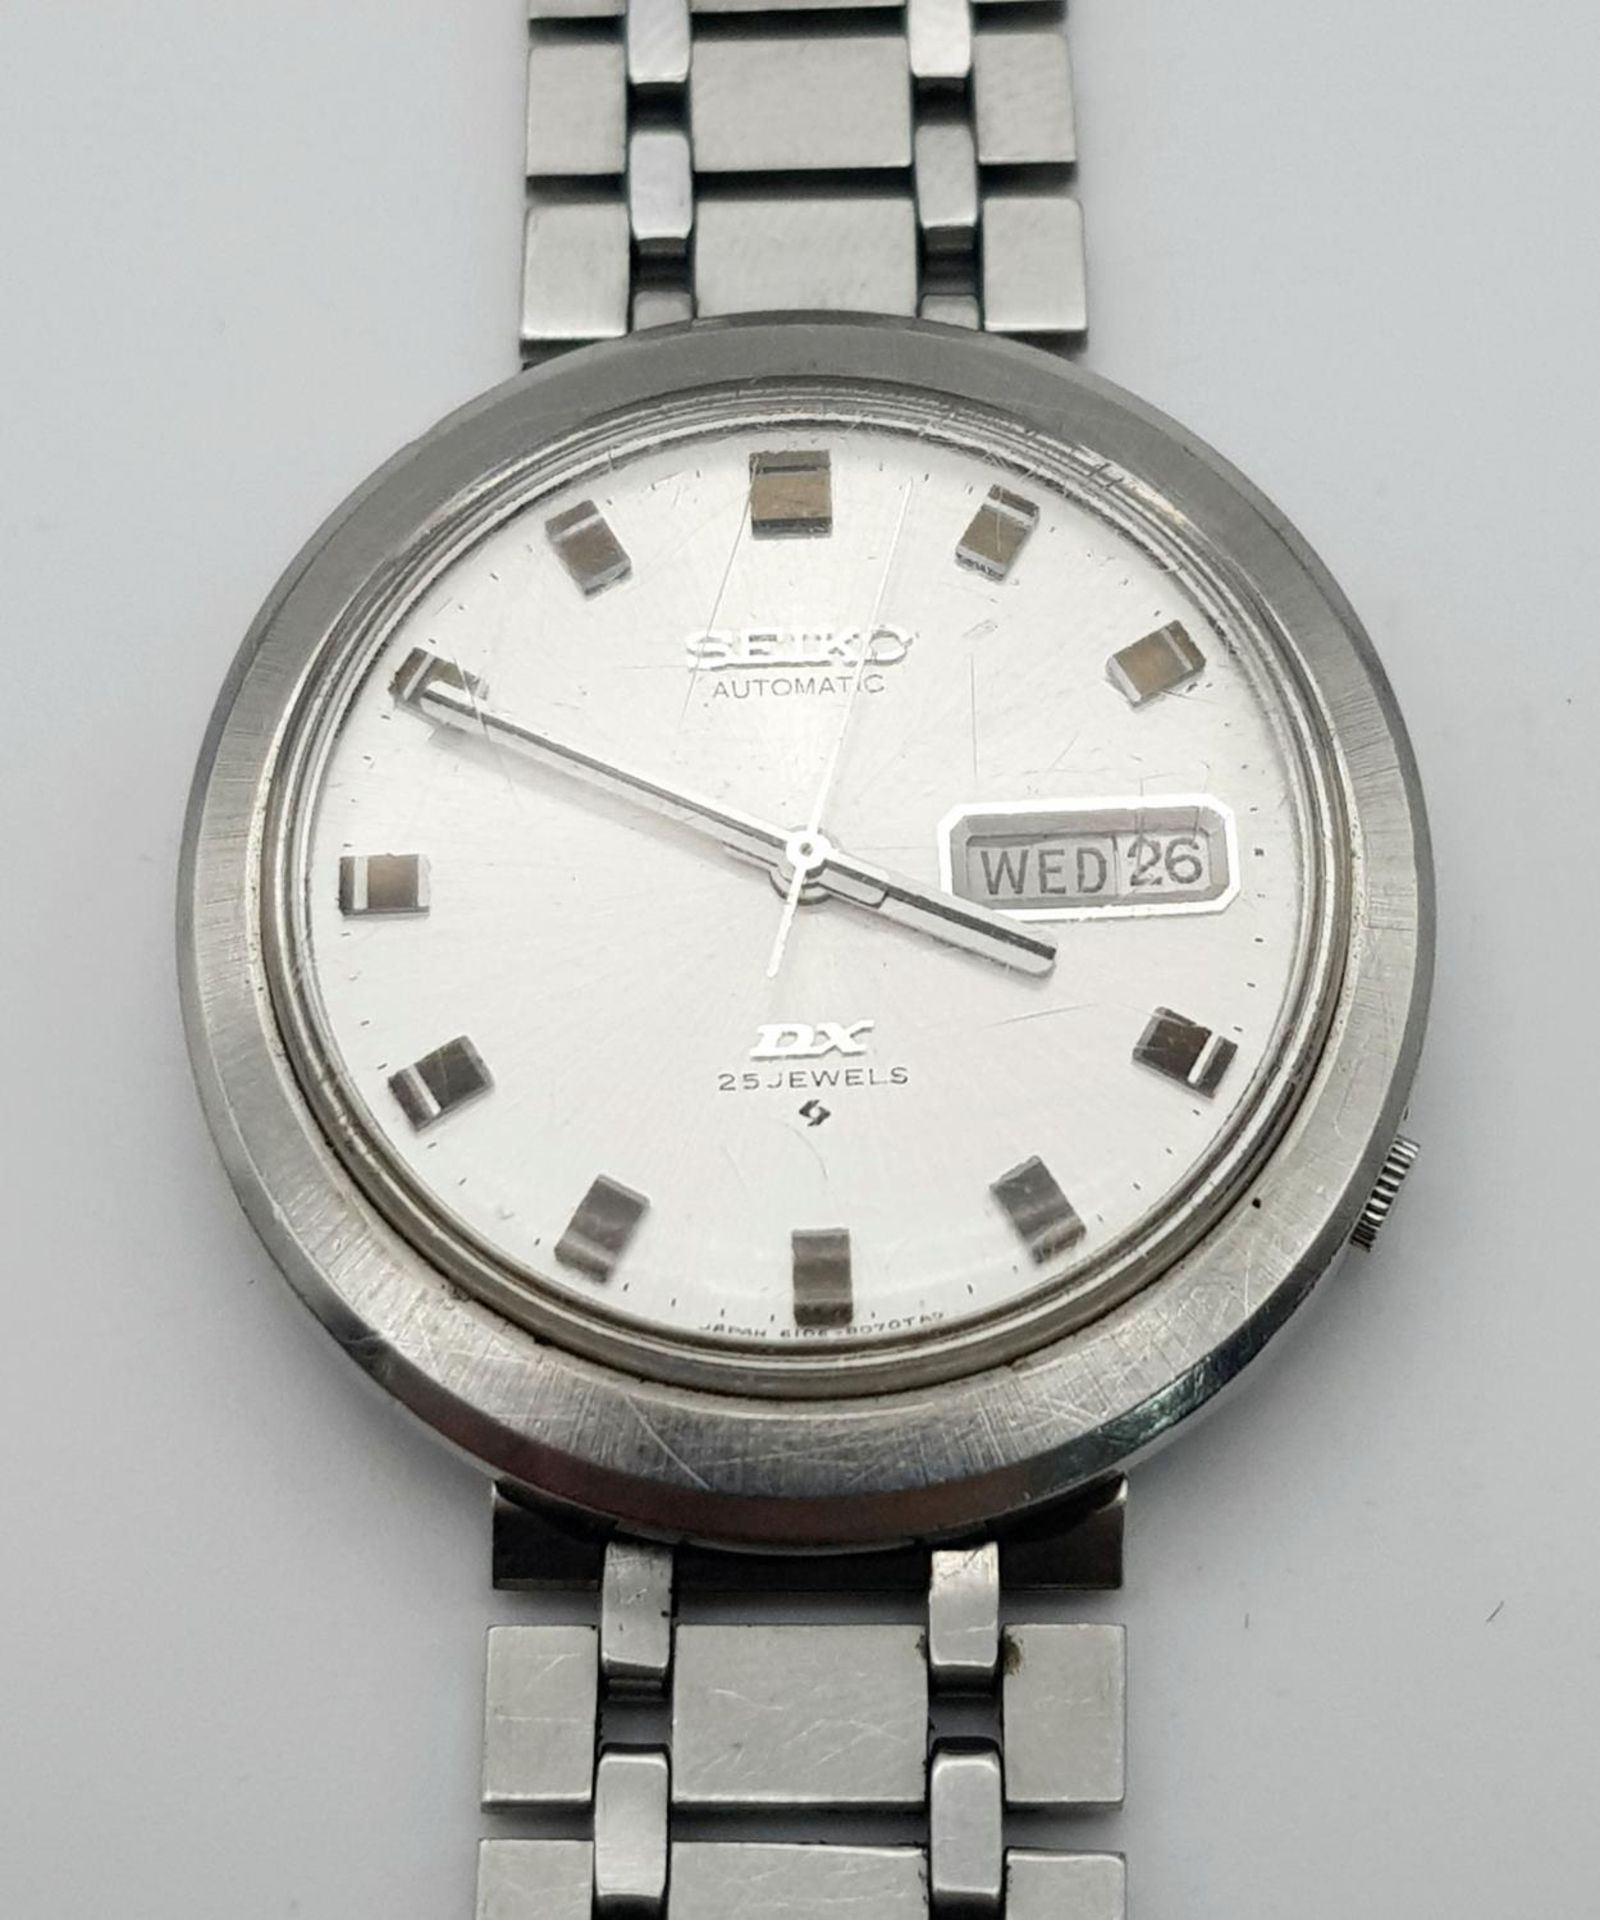 A Seiko Automatic DX 25 Jewels Gents Watch. Bracelet needs replacing. Case - 36mm. In working order. - Bild 2 aus 4